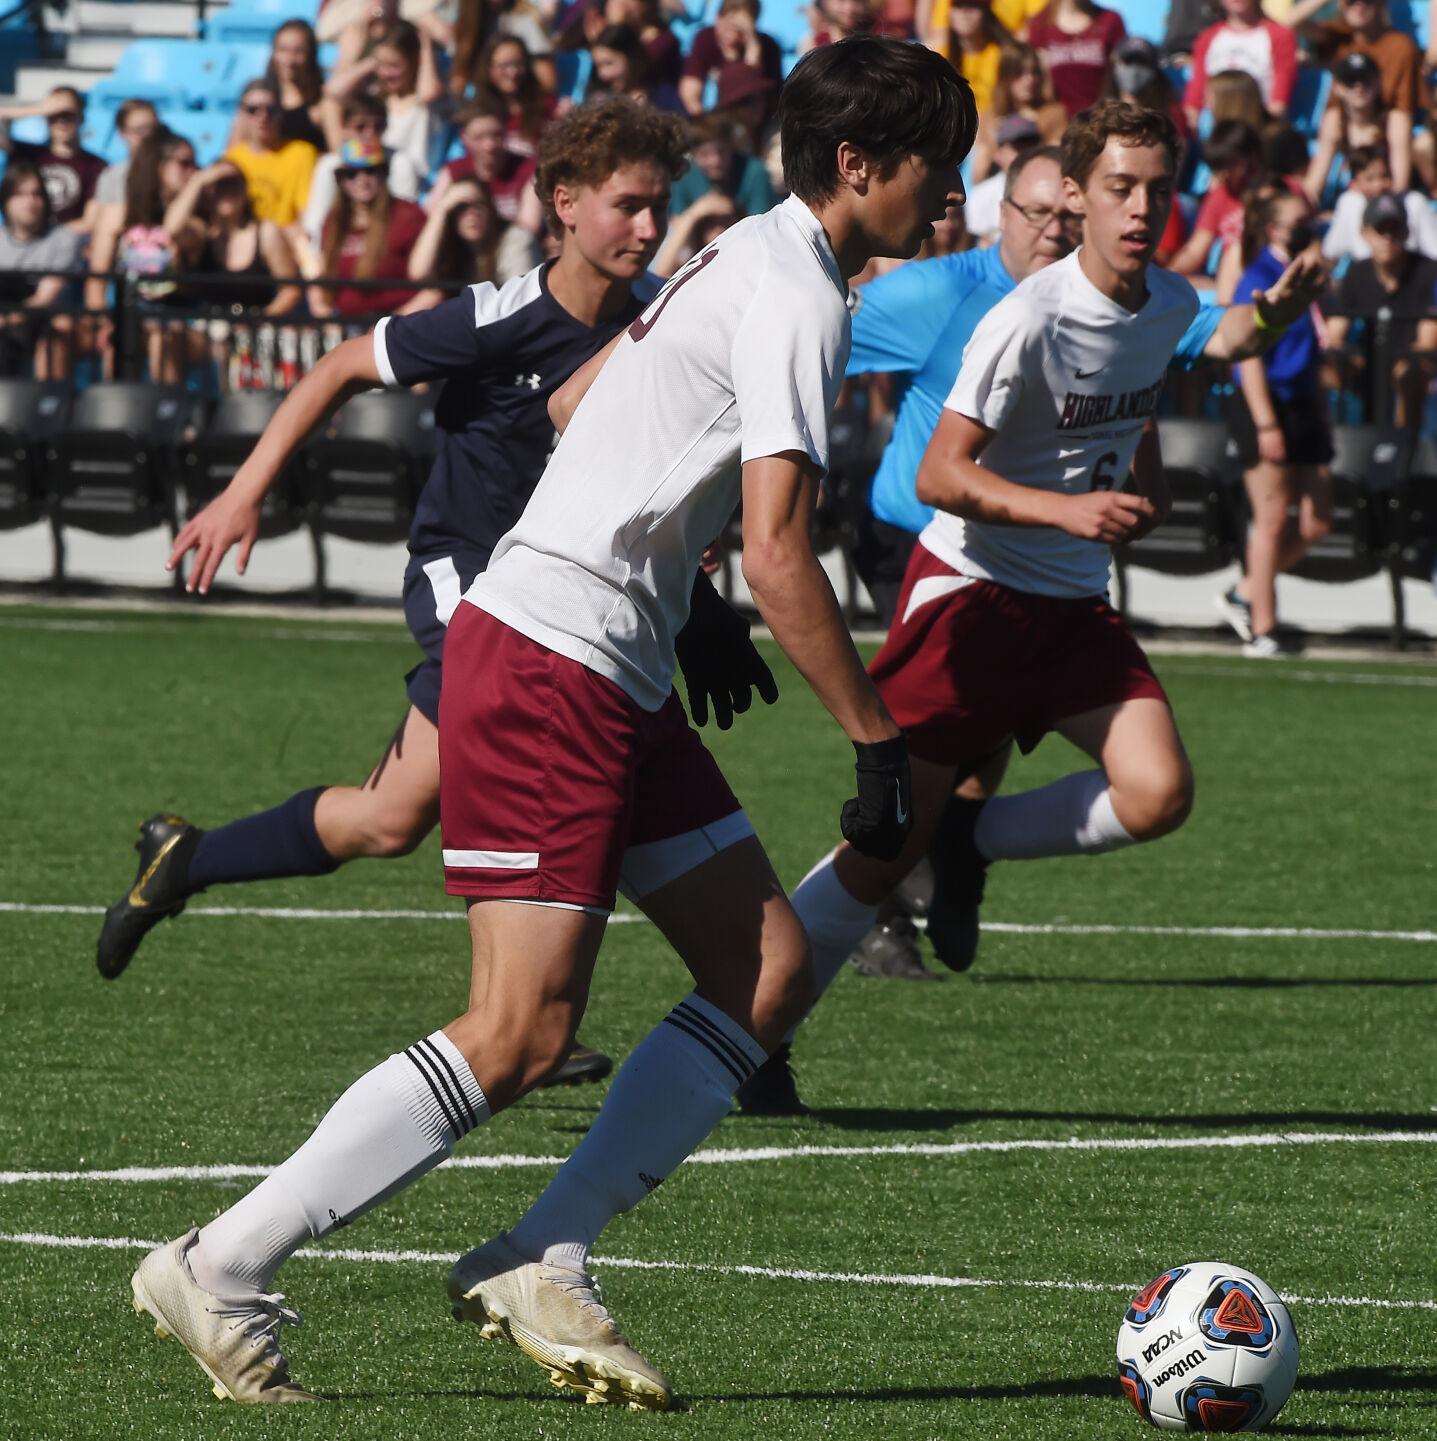 Thomas MacLaren School boys' soccer ready to get back on the road to